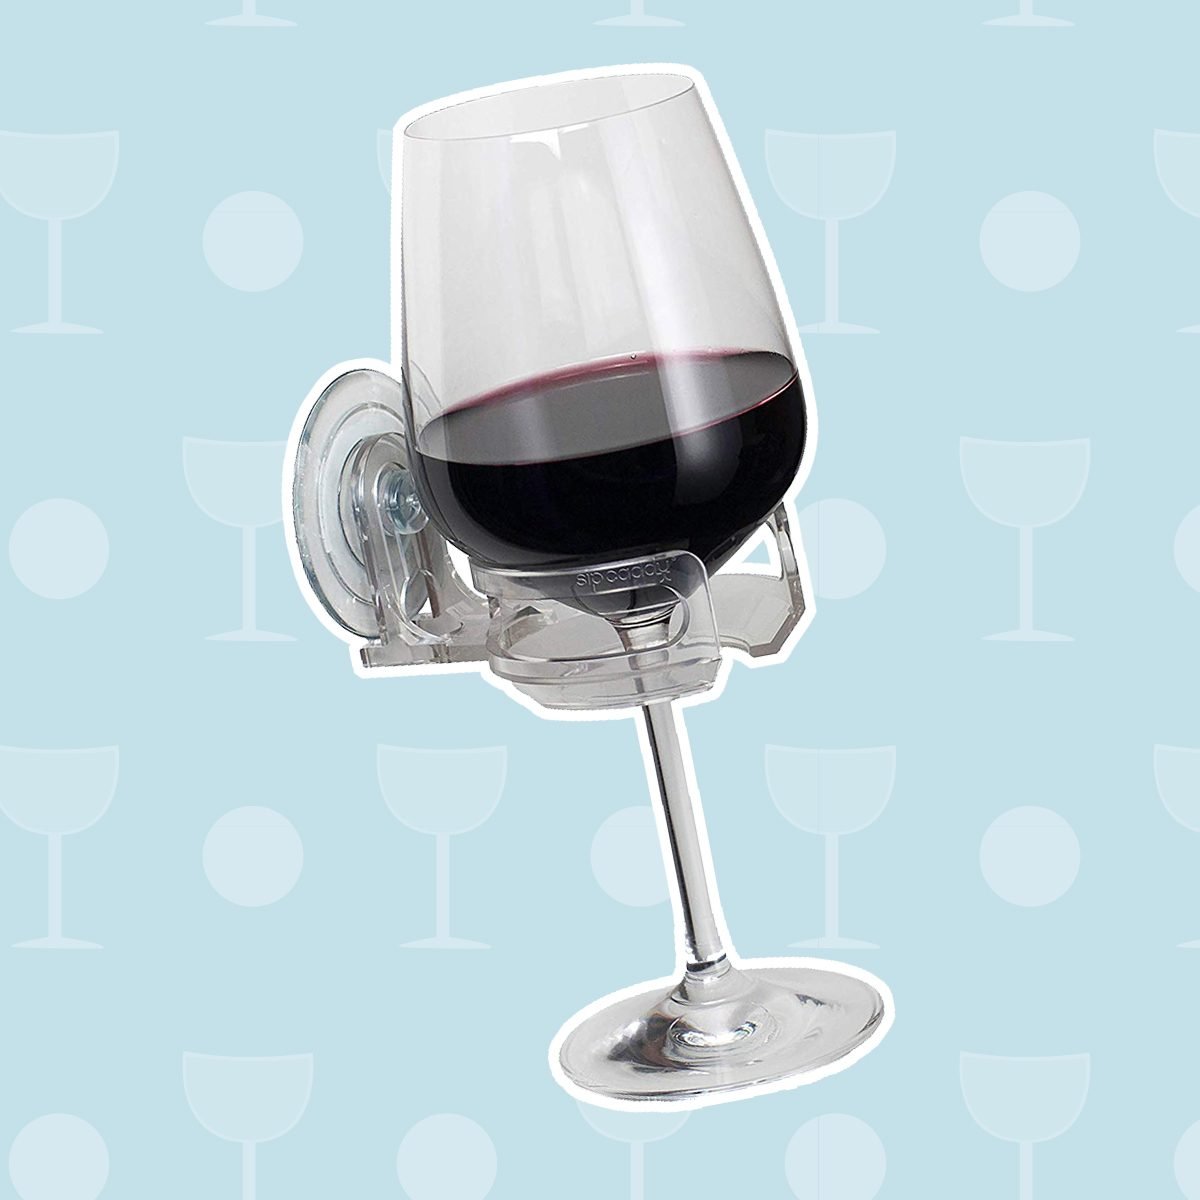 17 Awesome Wine Gifts That Aren't a Bottle of Vino